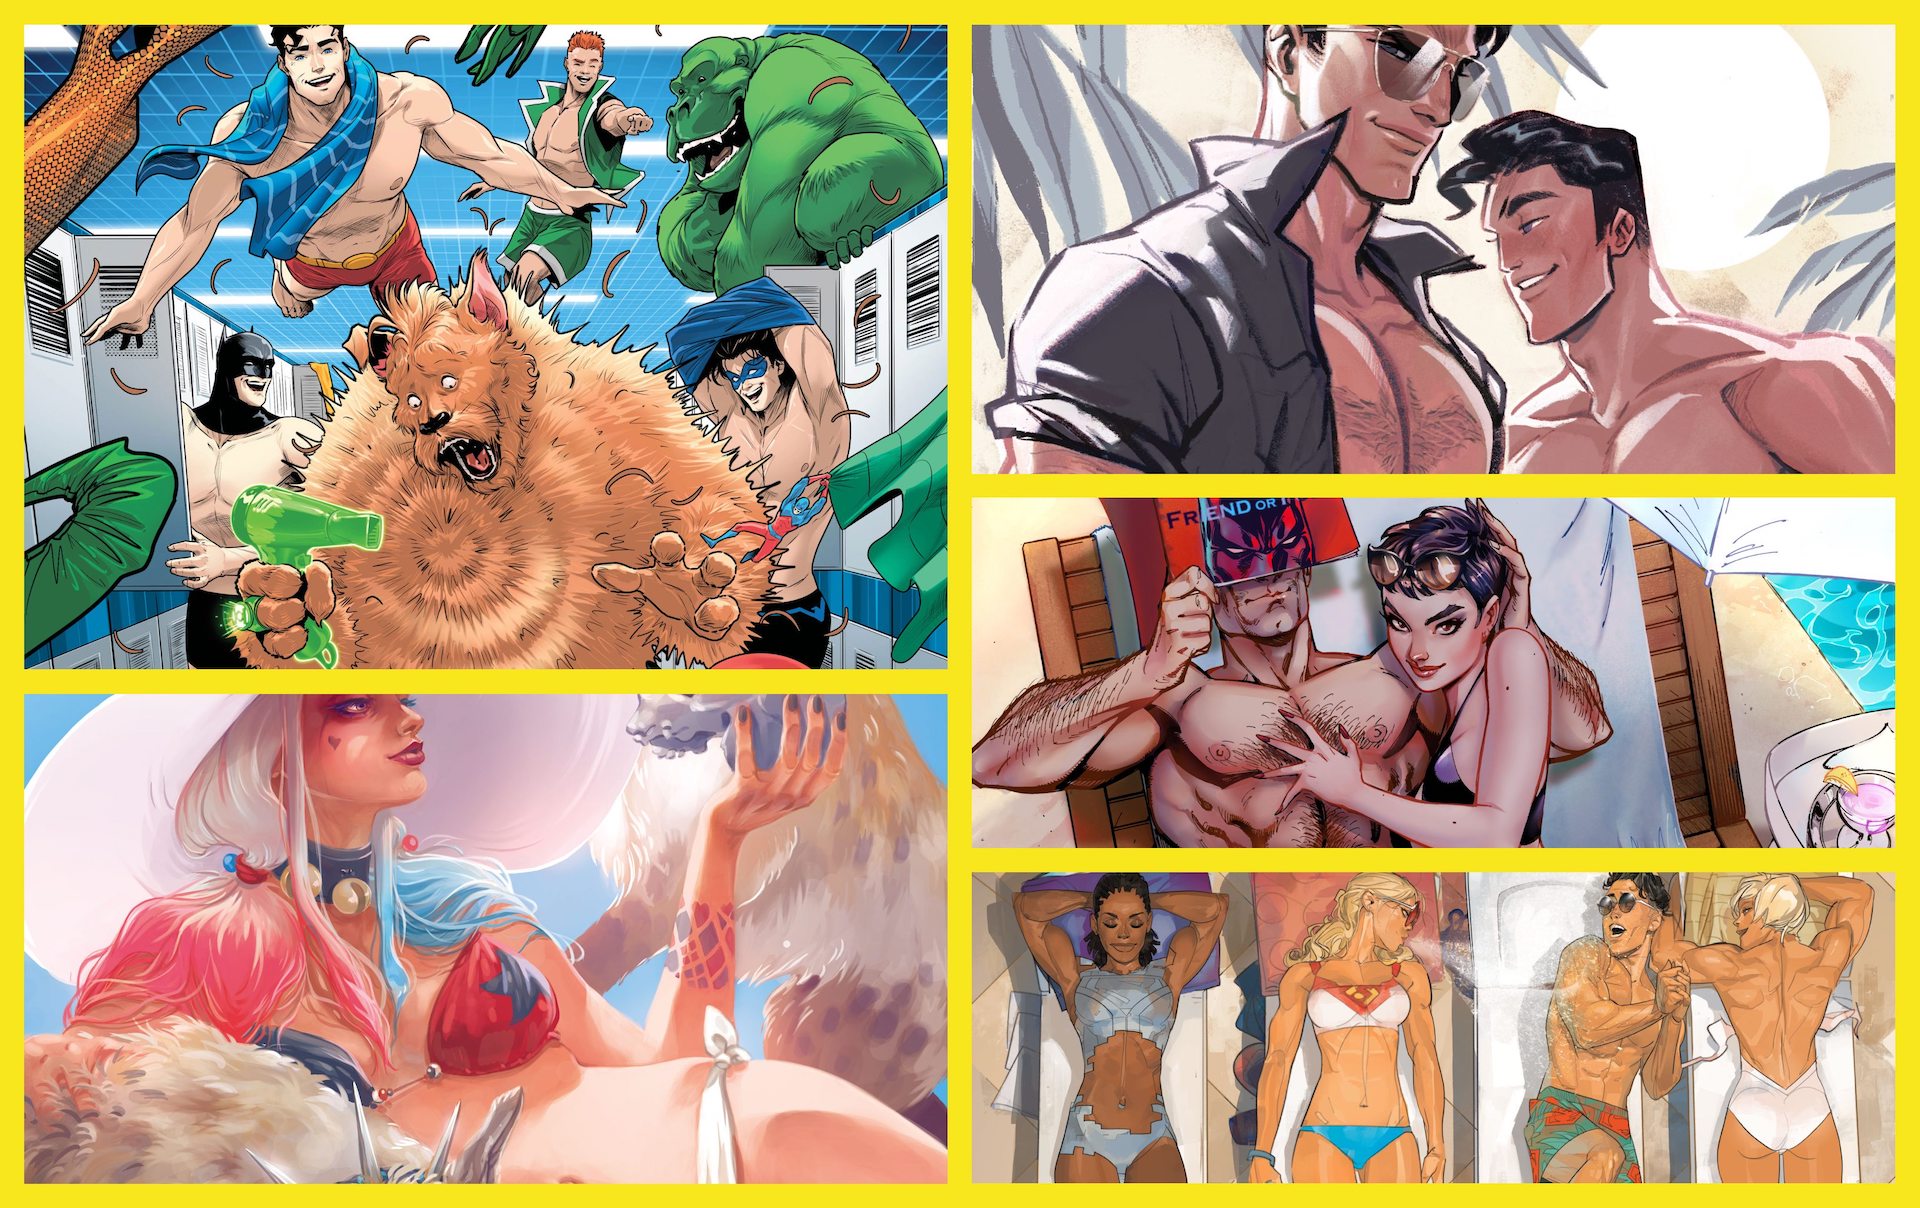 DC Comics strips down for 'G’nort’s Illustrated Swimsuit Edition' out August 29